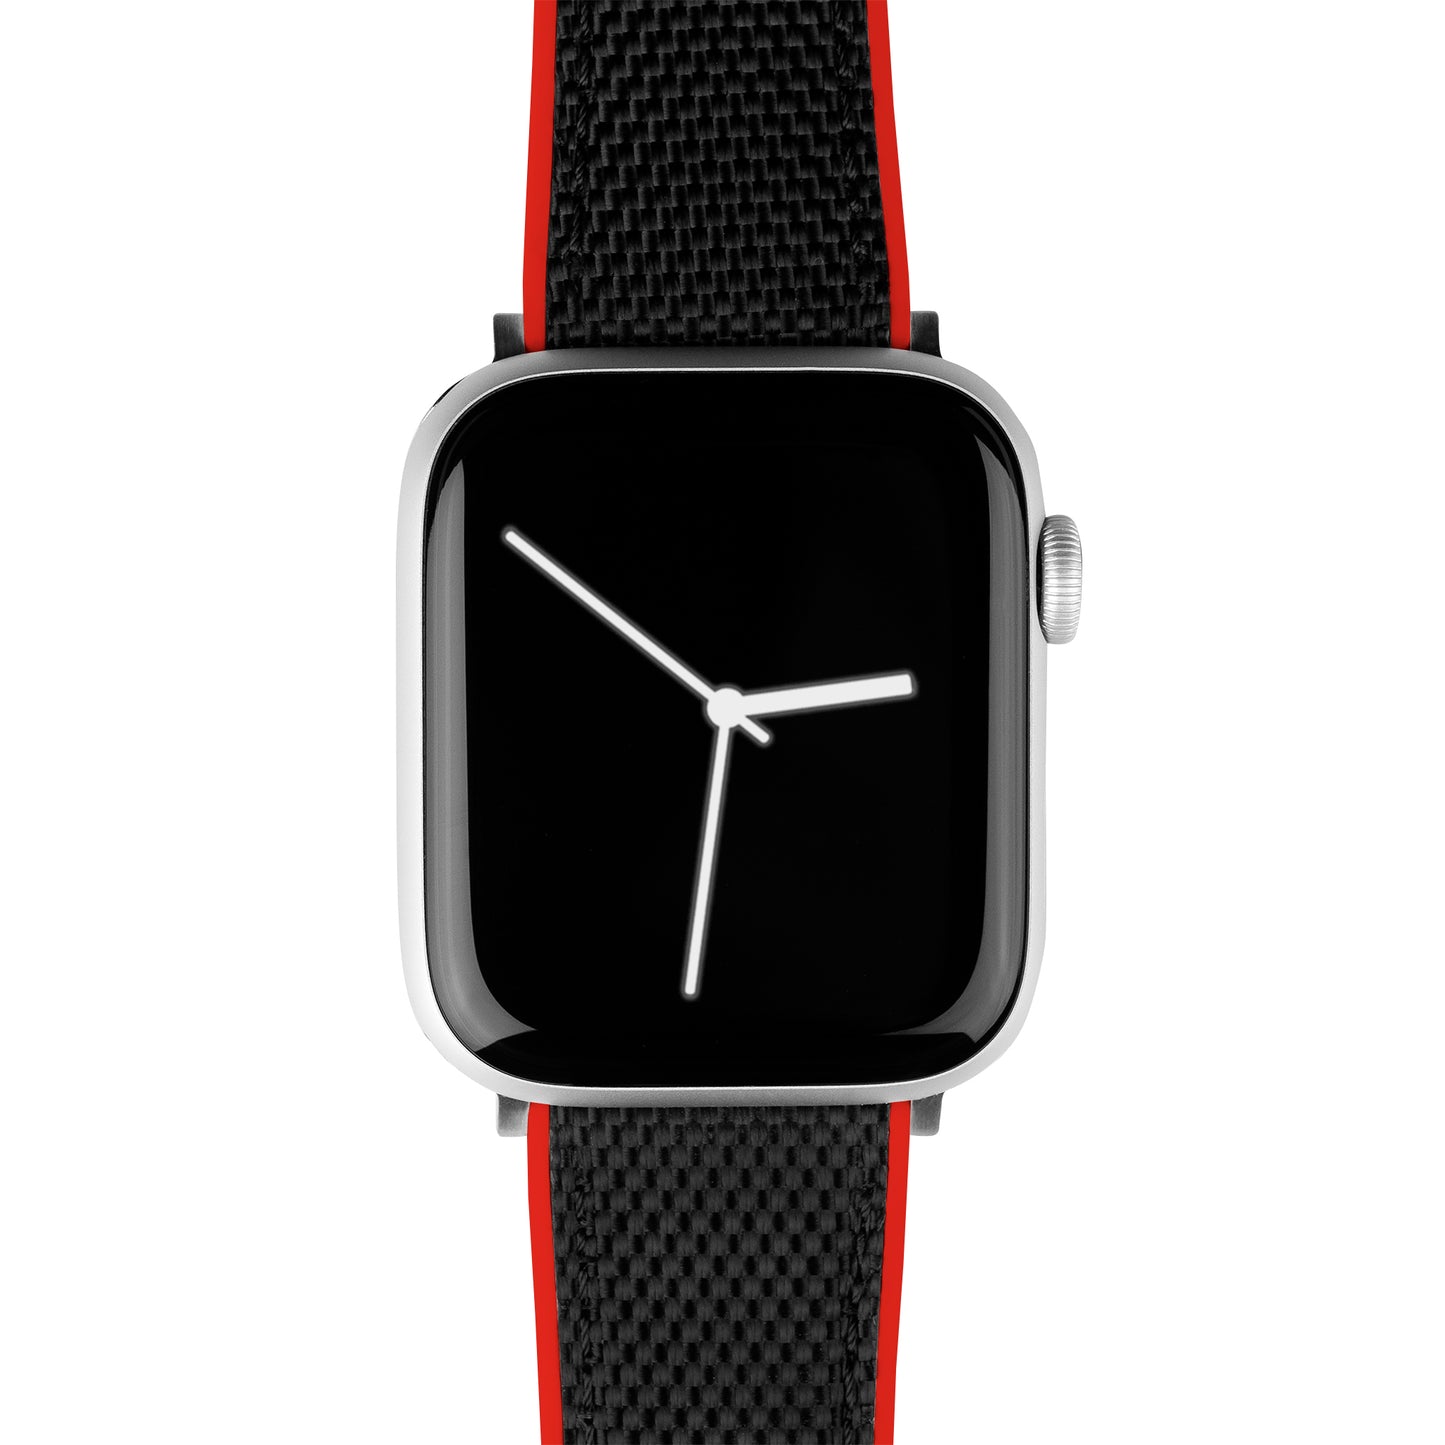 Apple Watch Black Cordura Fabric And Crimson Red Silicone Hybrid Watch Band